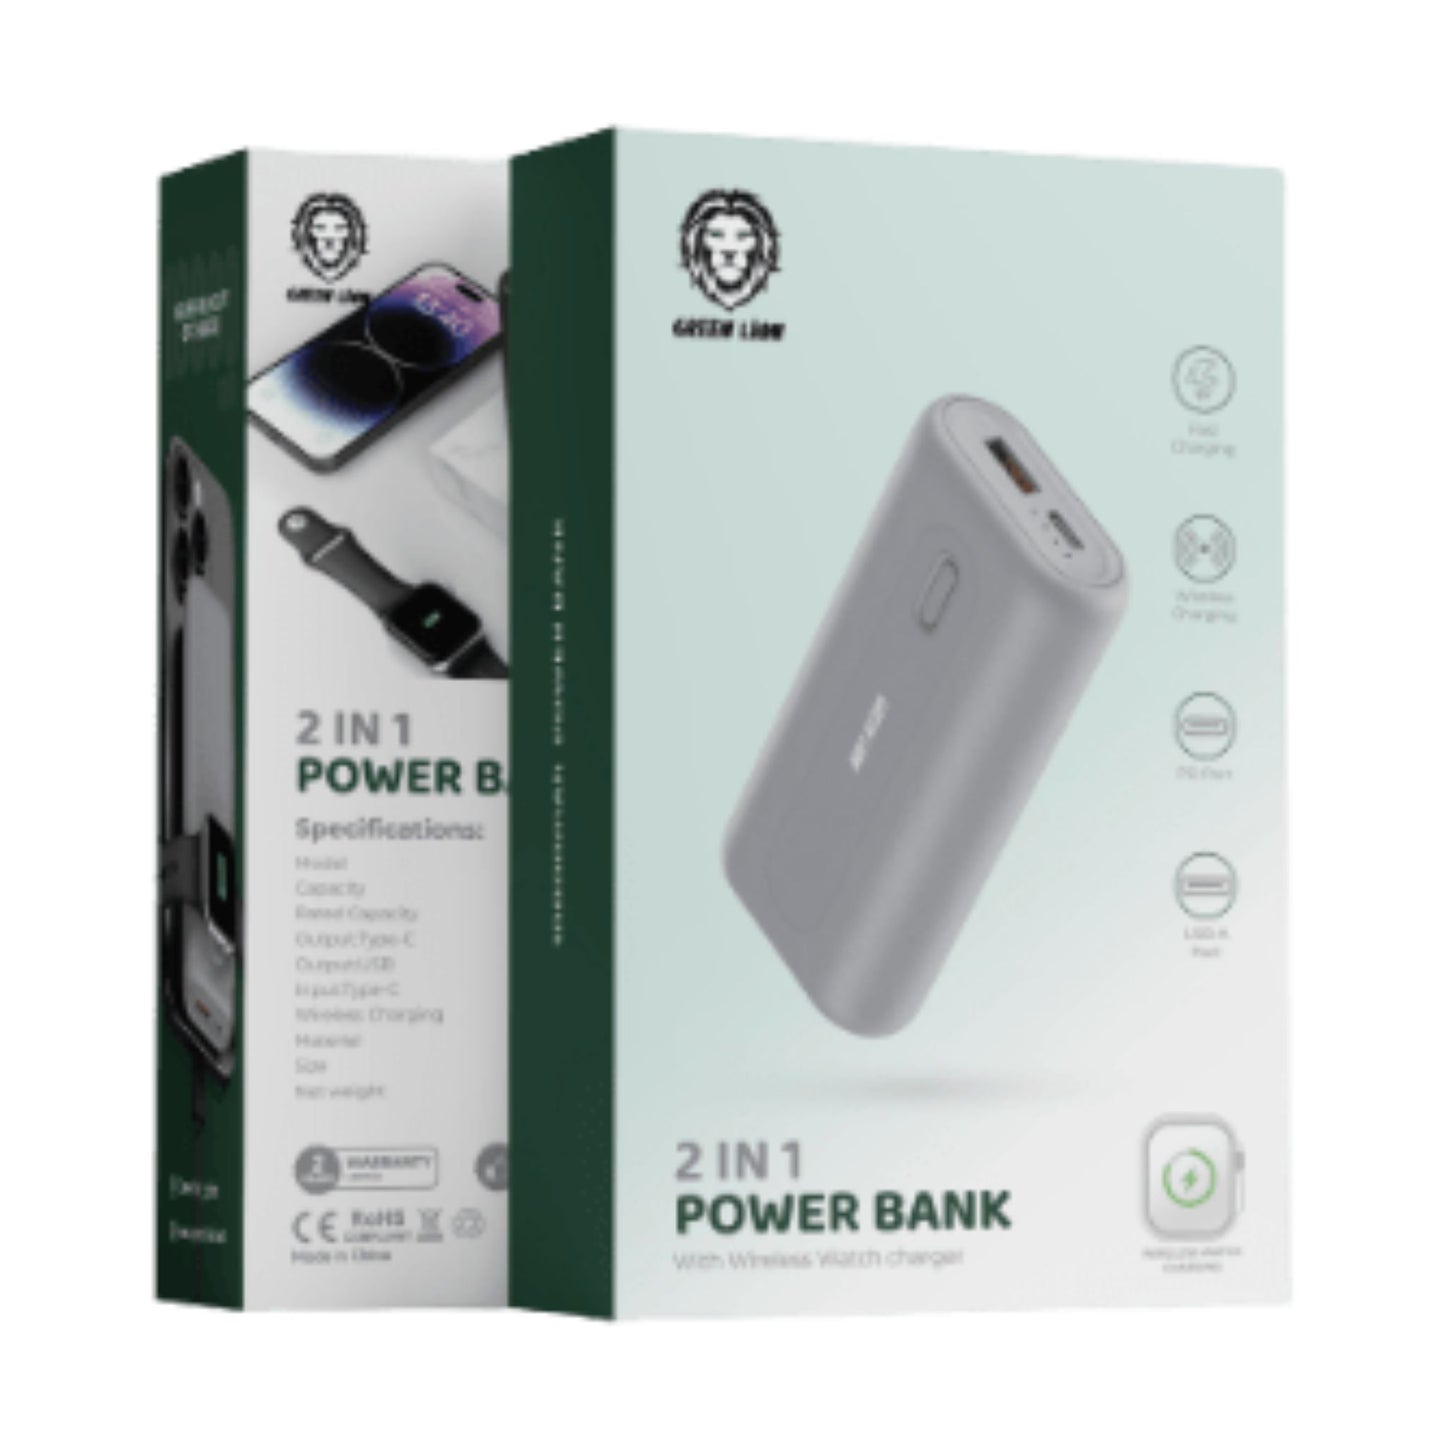 Green Lion 10000mAh 2 In 1 Power Bank With Wireless Charger_GRAY